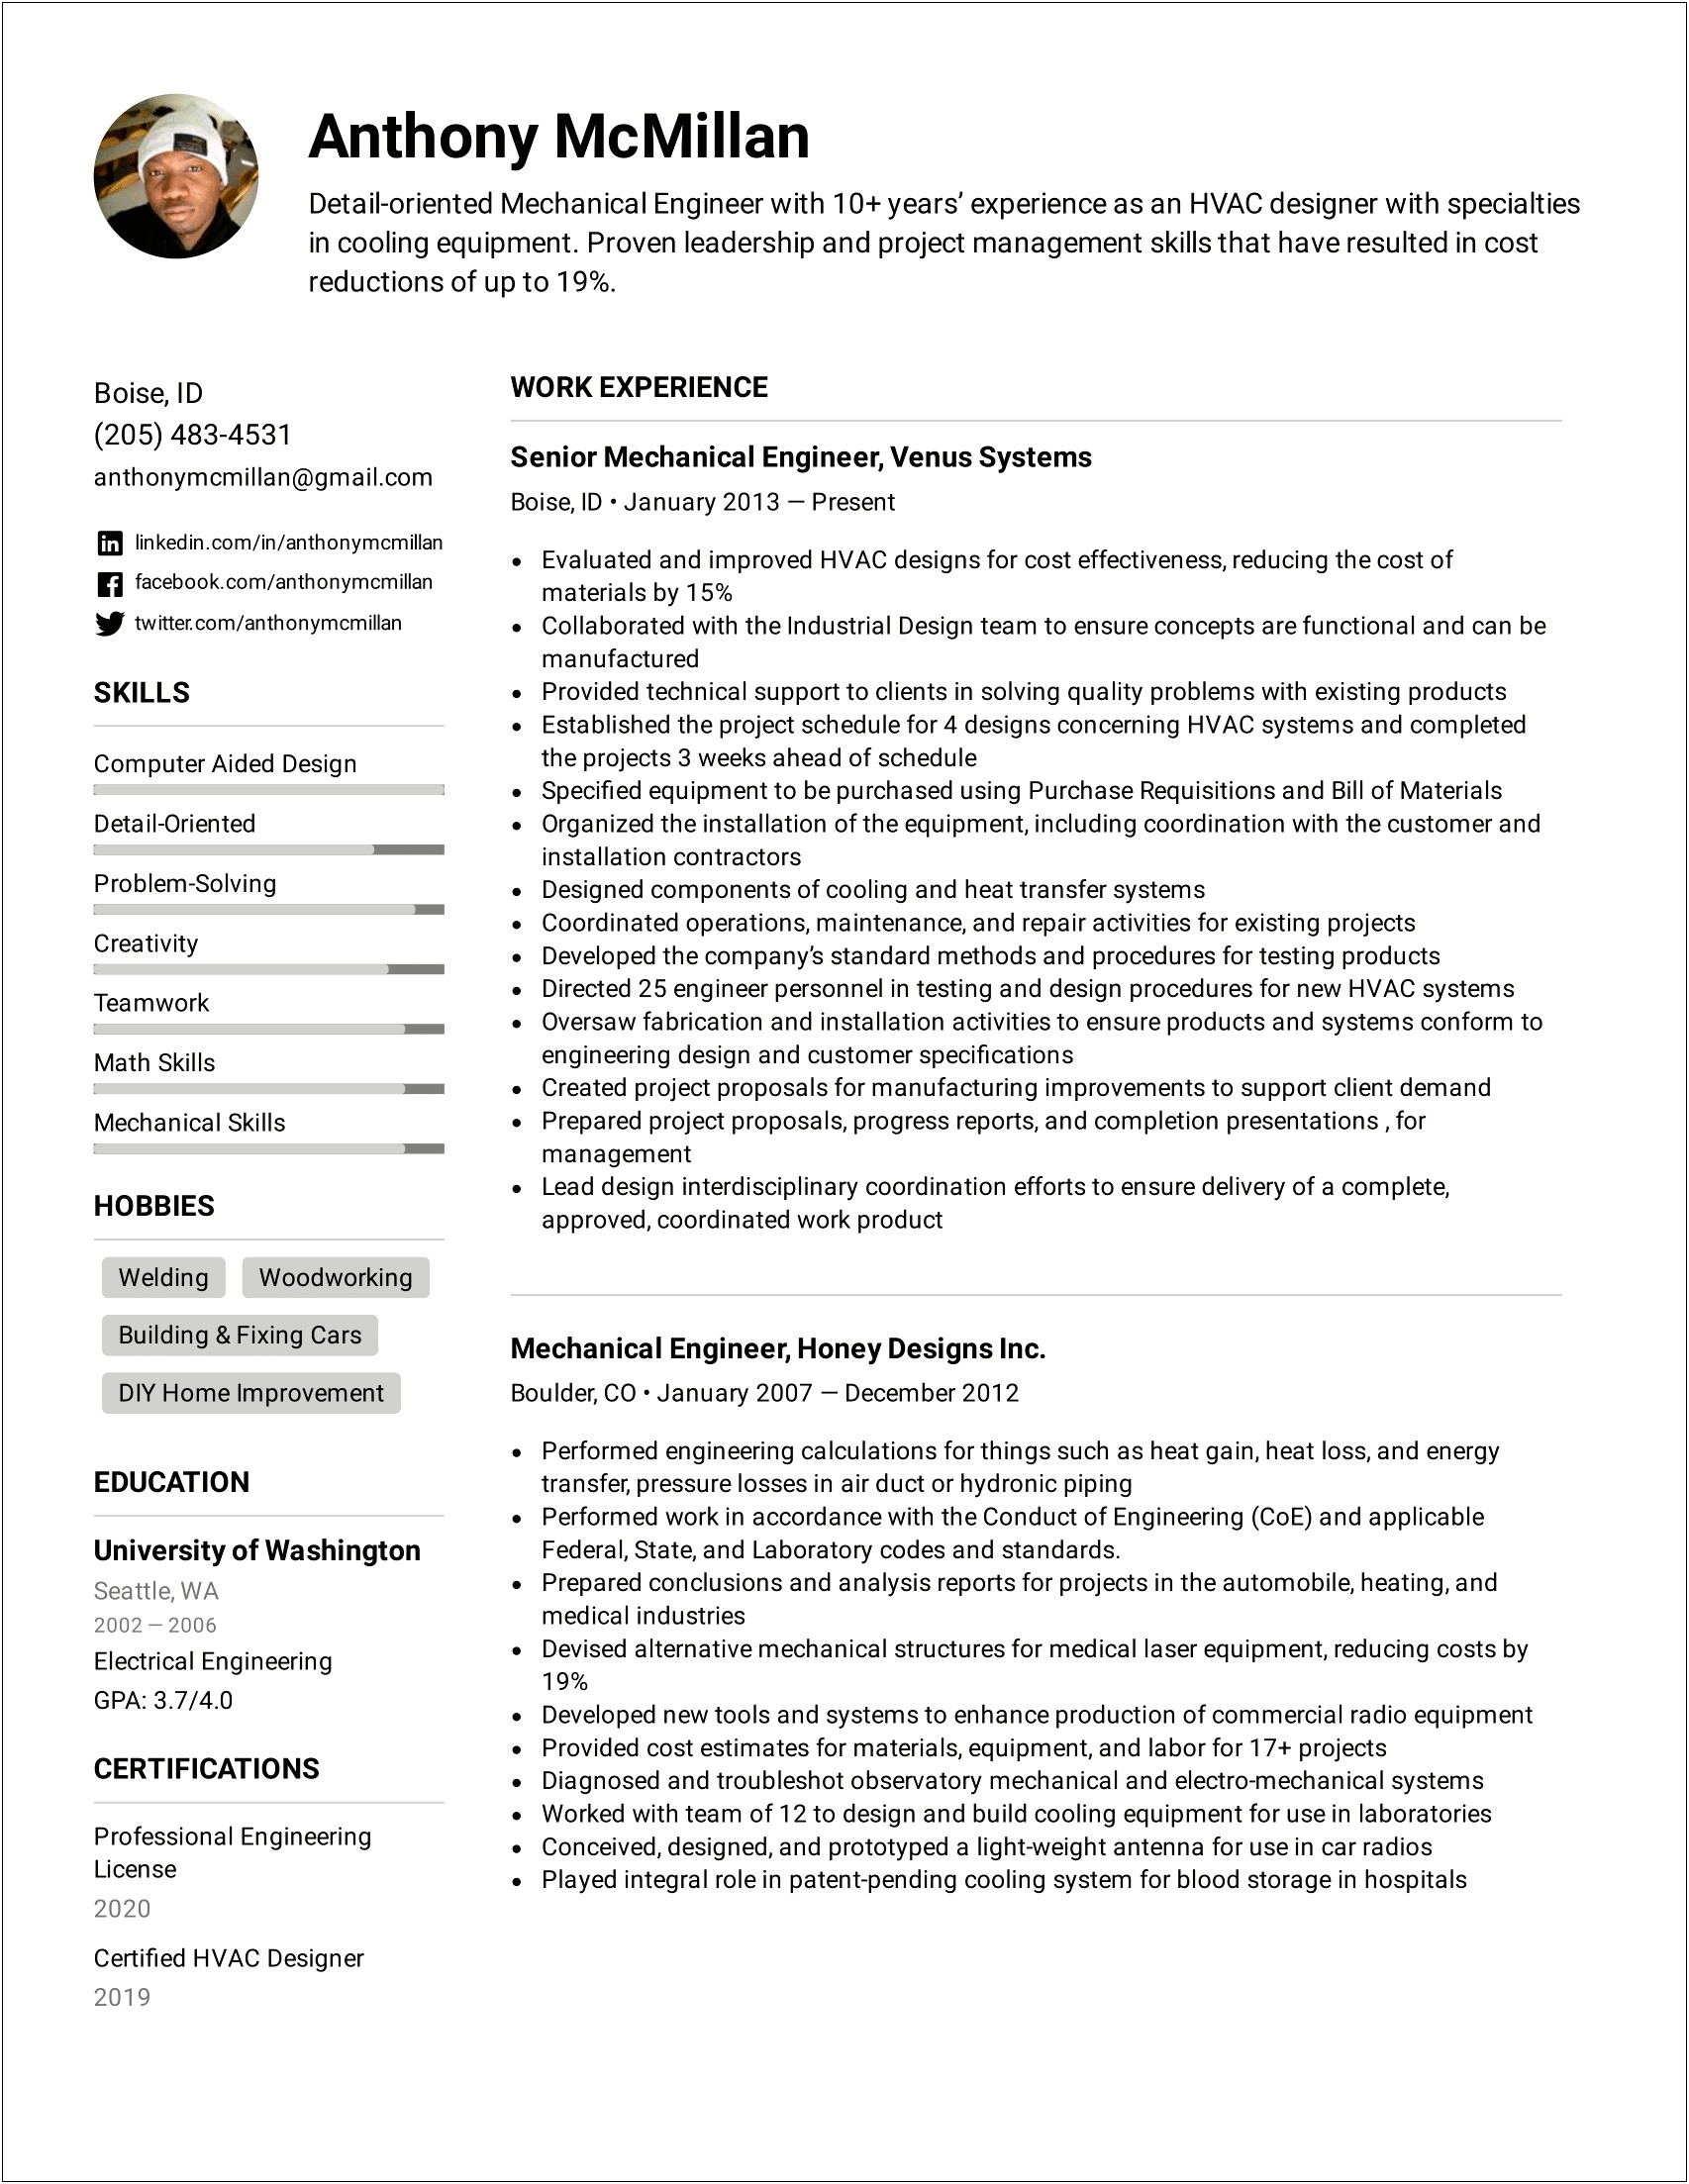 Resume Examples With Patent Pending